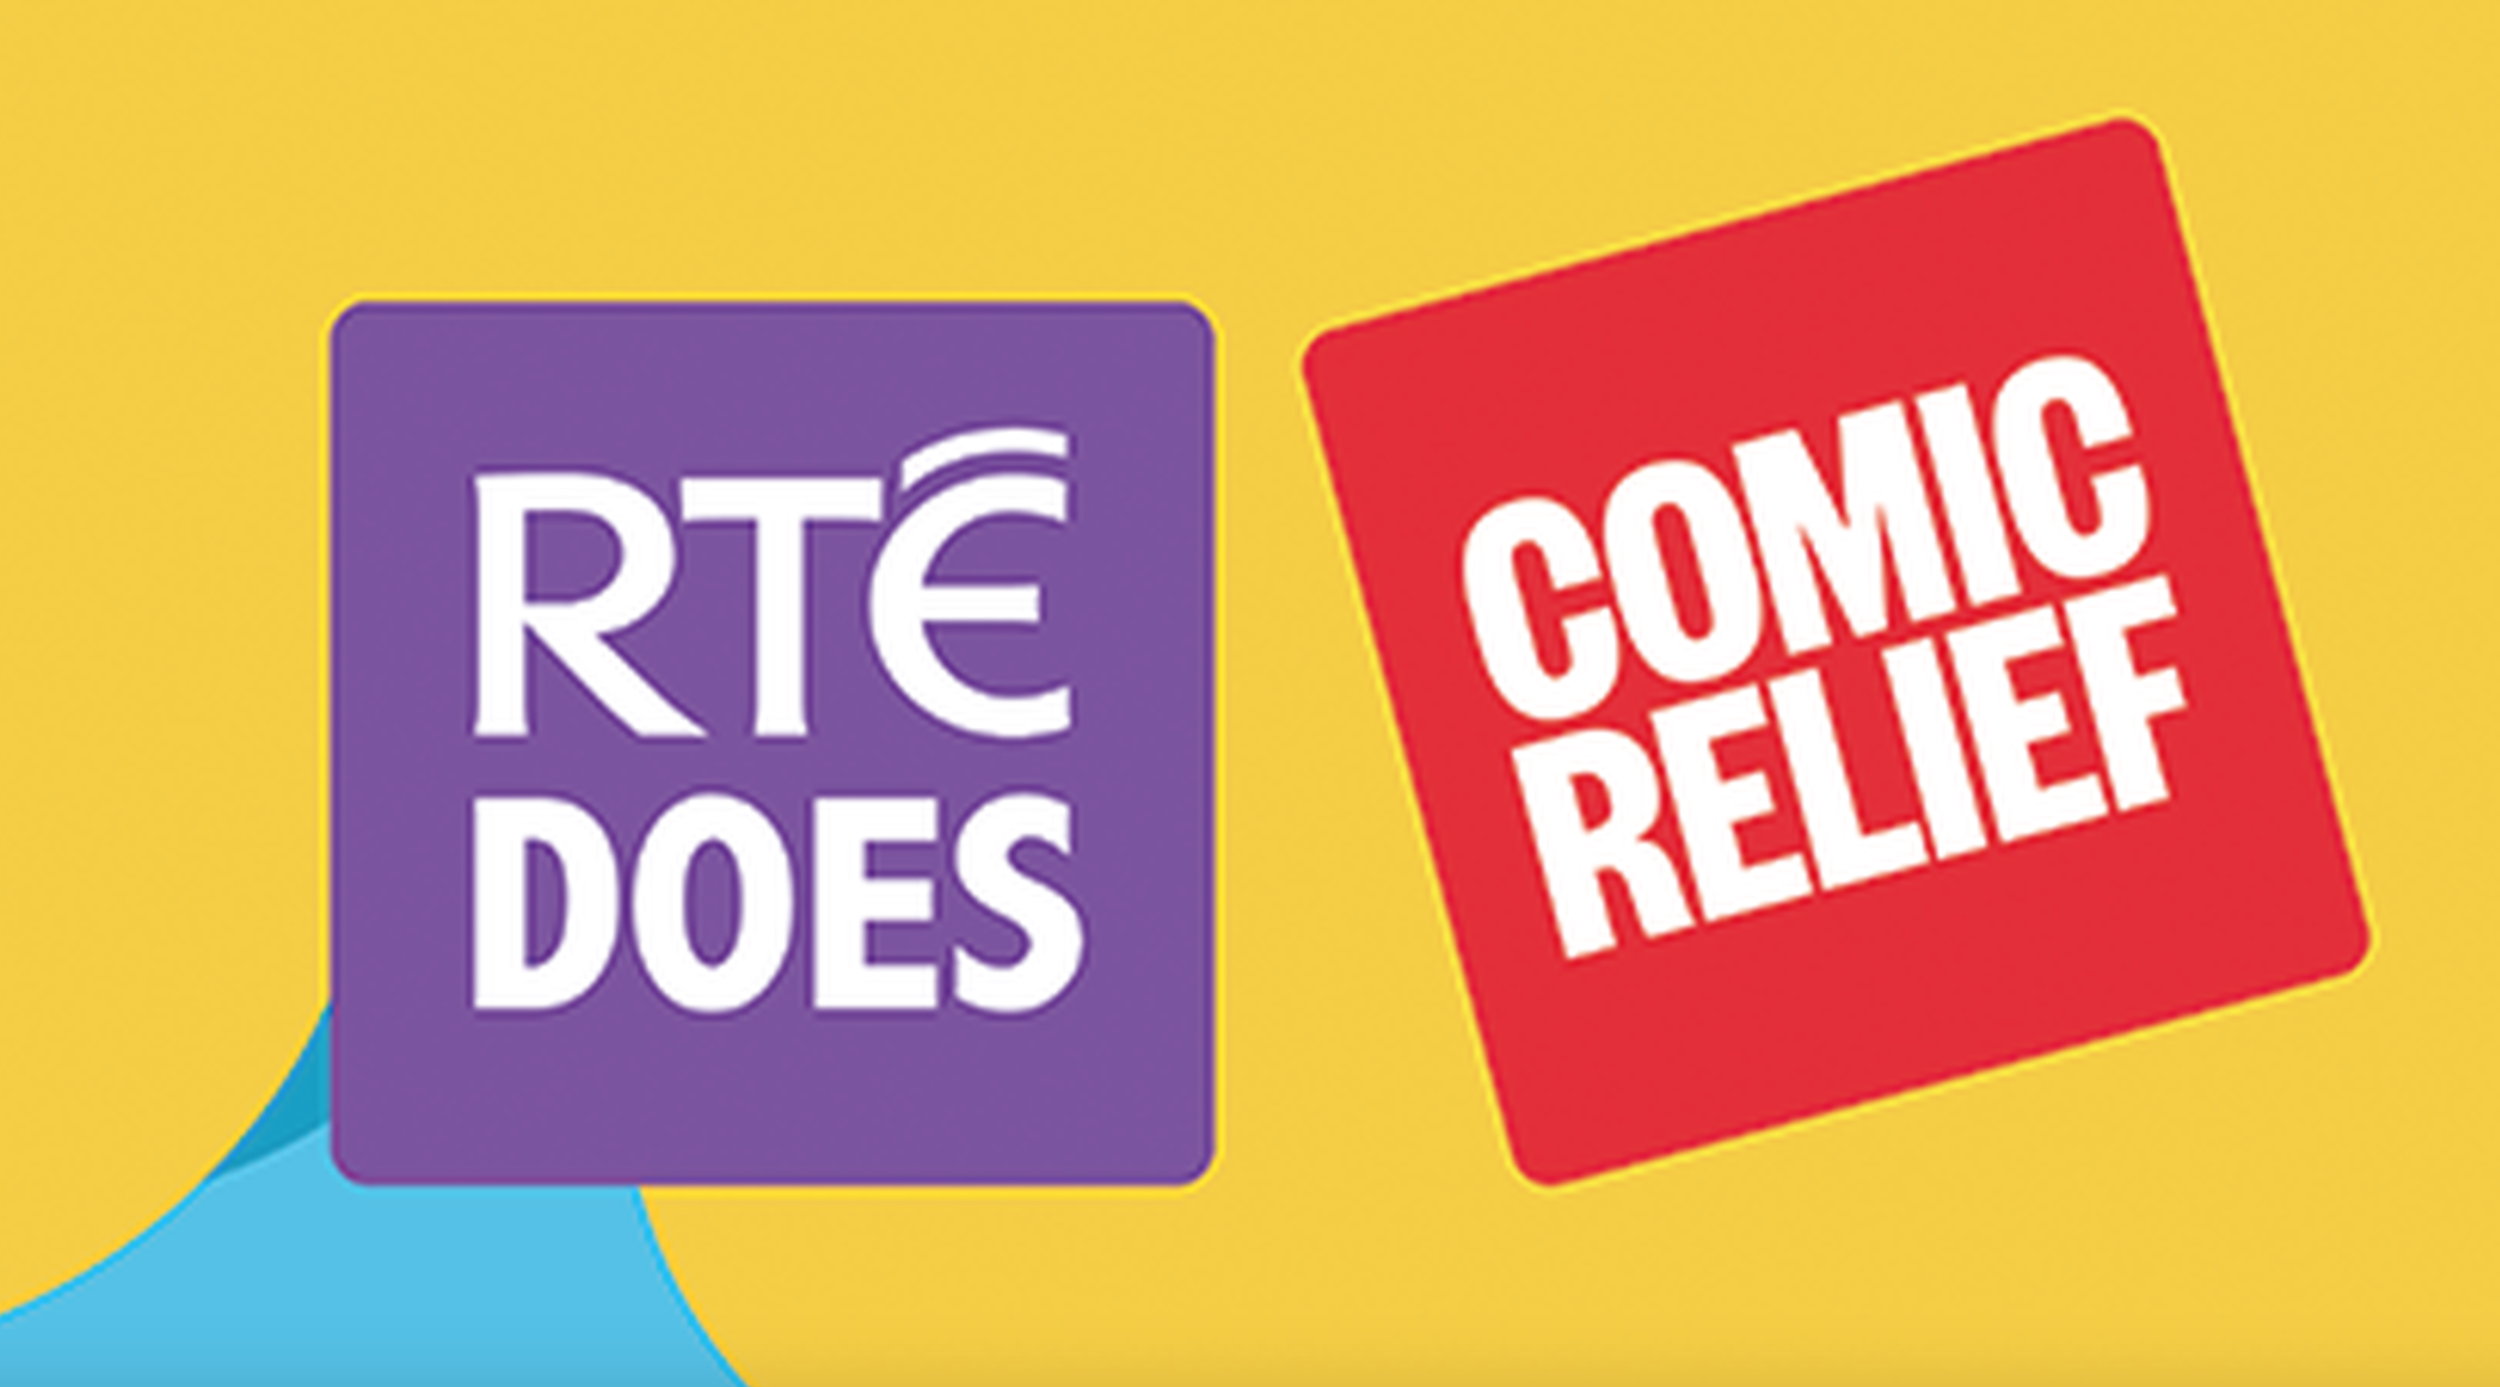 We received €5,000 from RTE Comic Relief